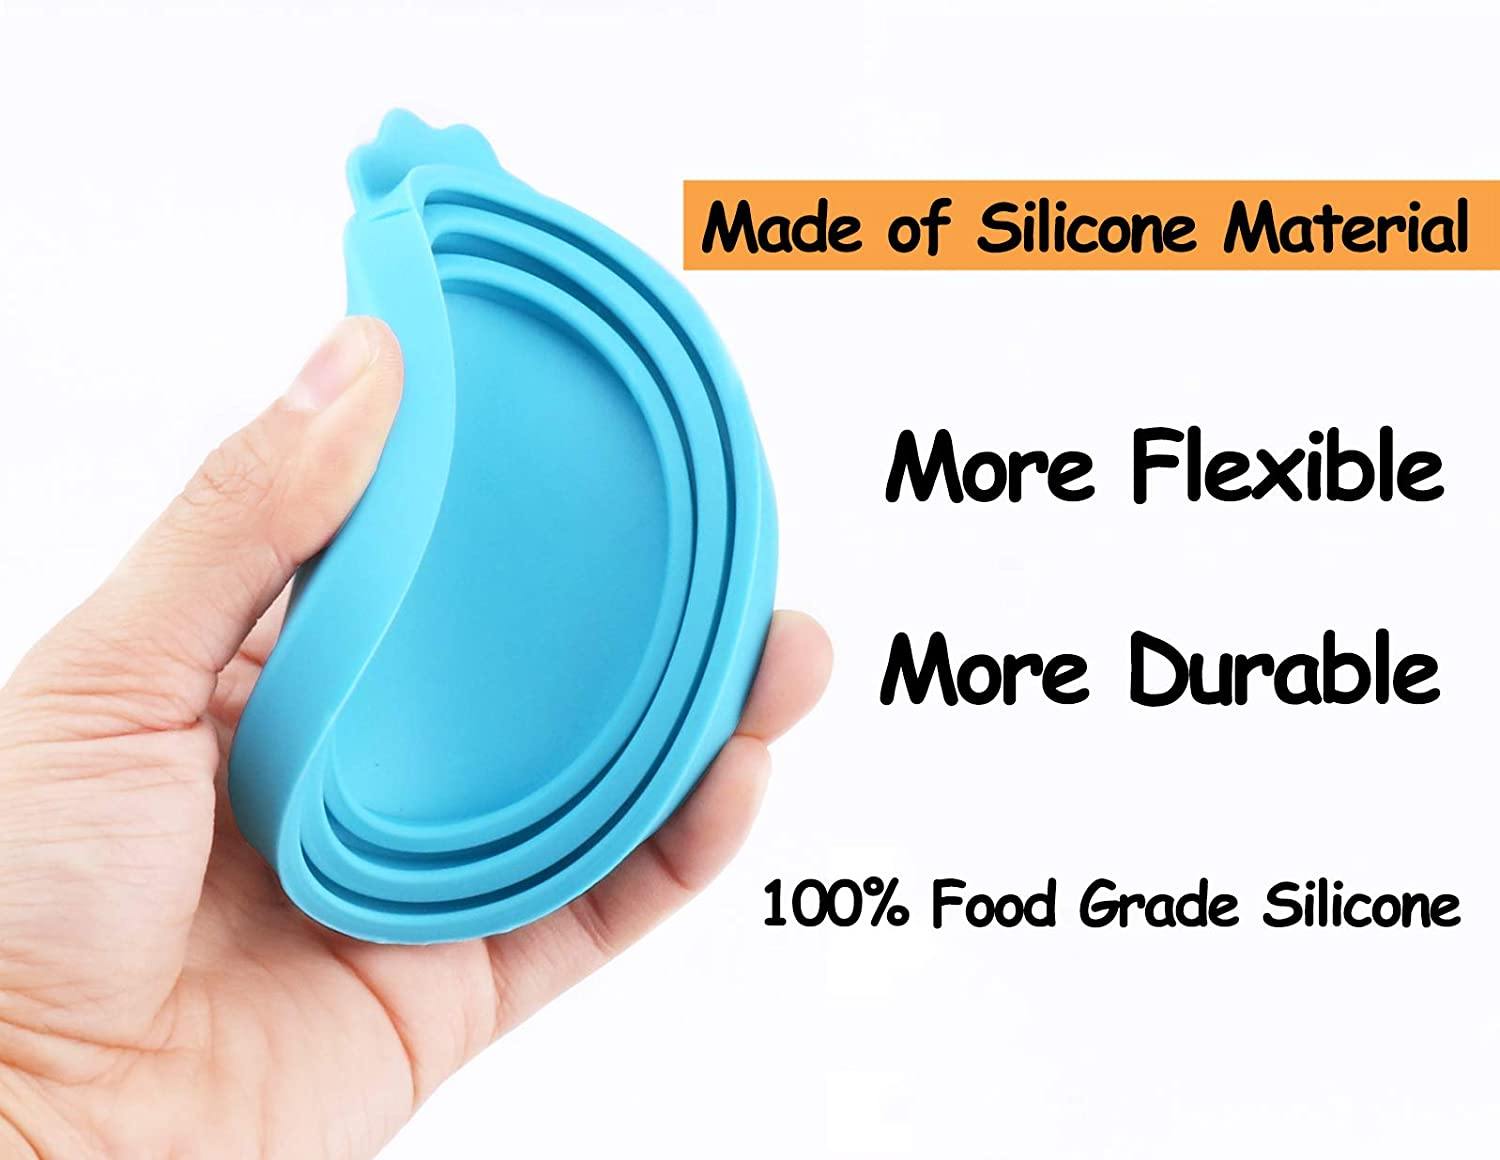 Pet Food Can Cover | Soft Silicone Lids - Pet Food Can Cover | Soft Silicone Lids - PetsLoveSurprises